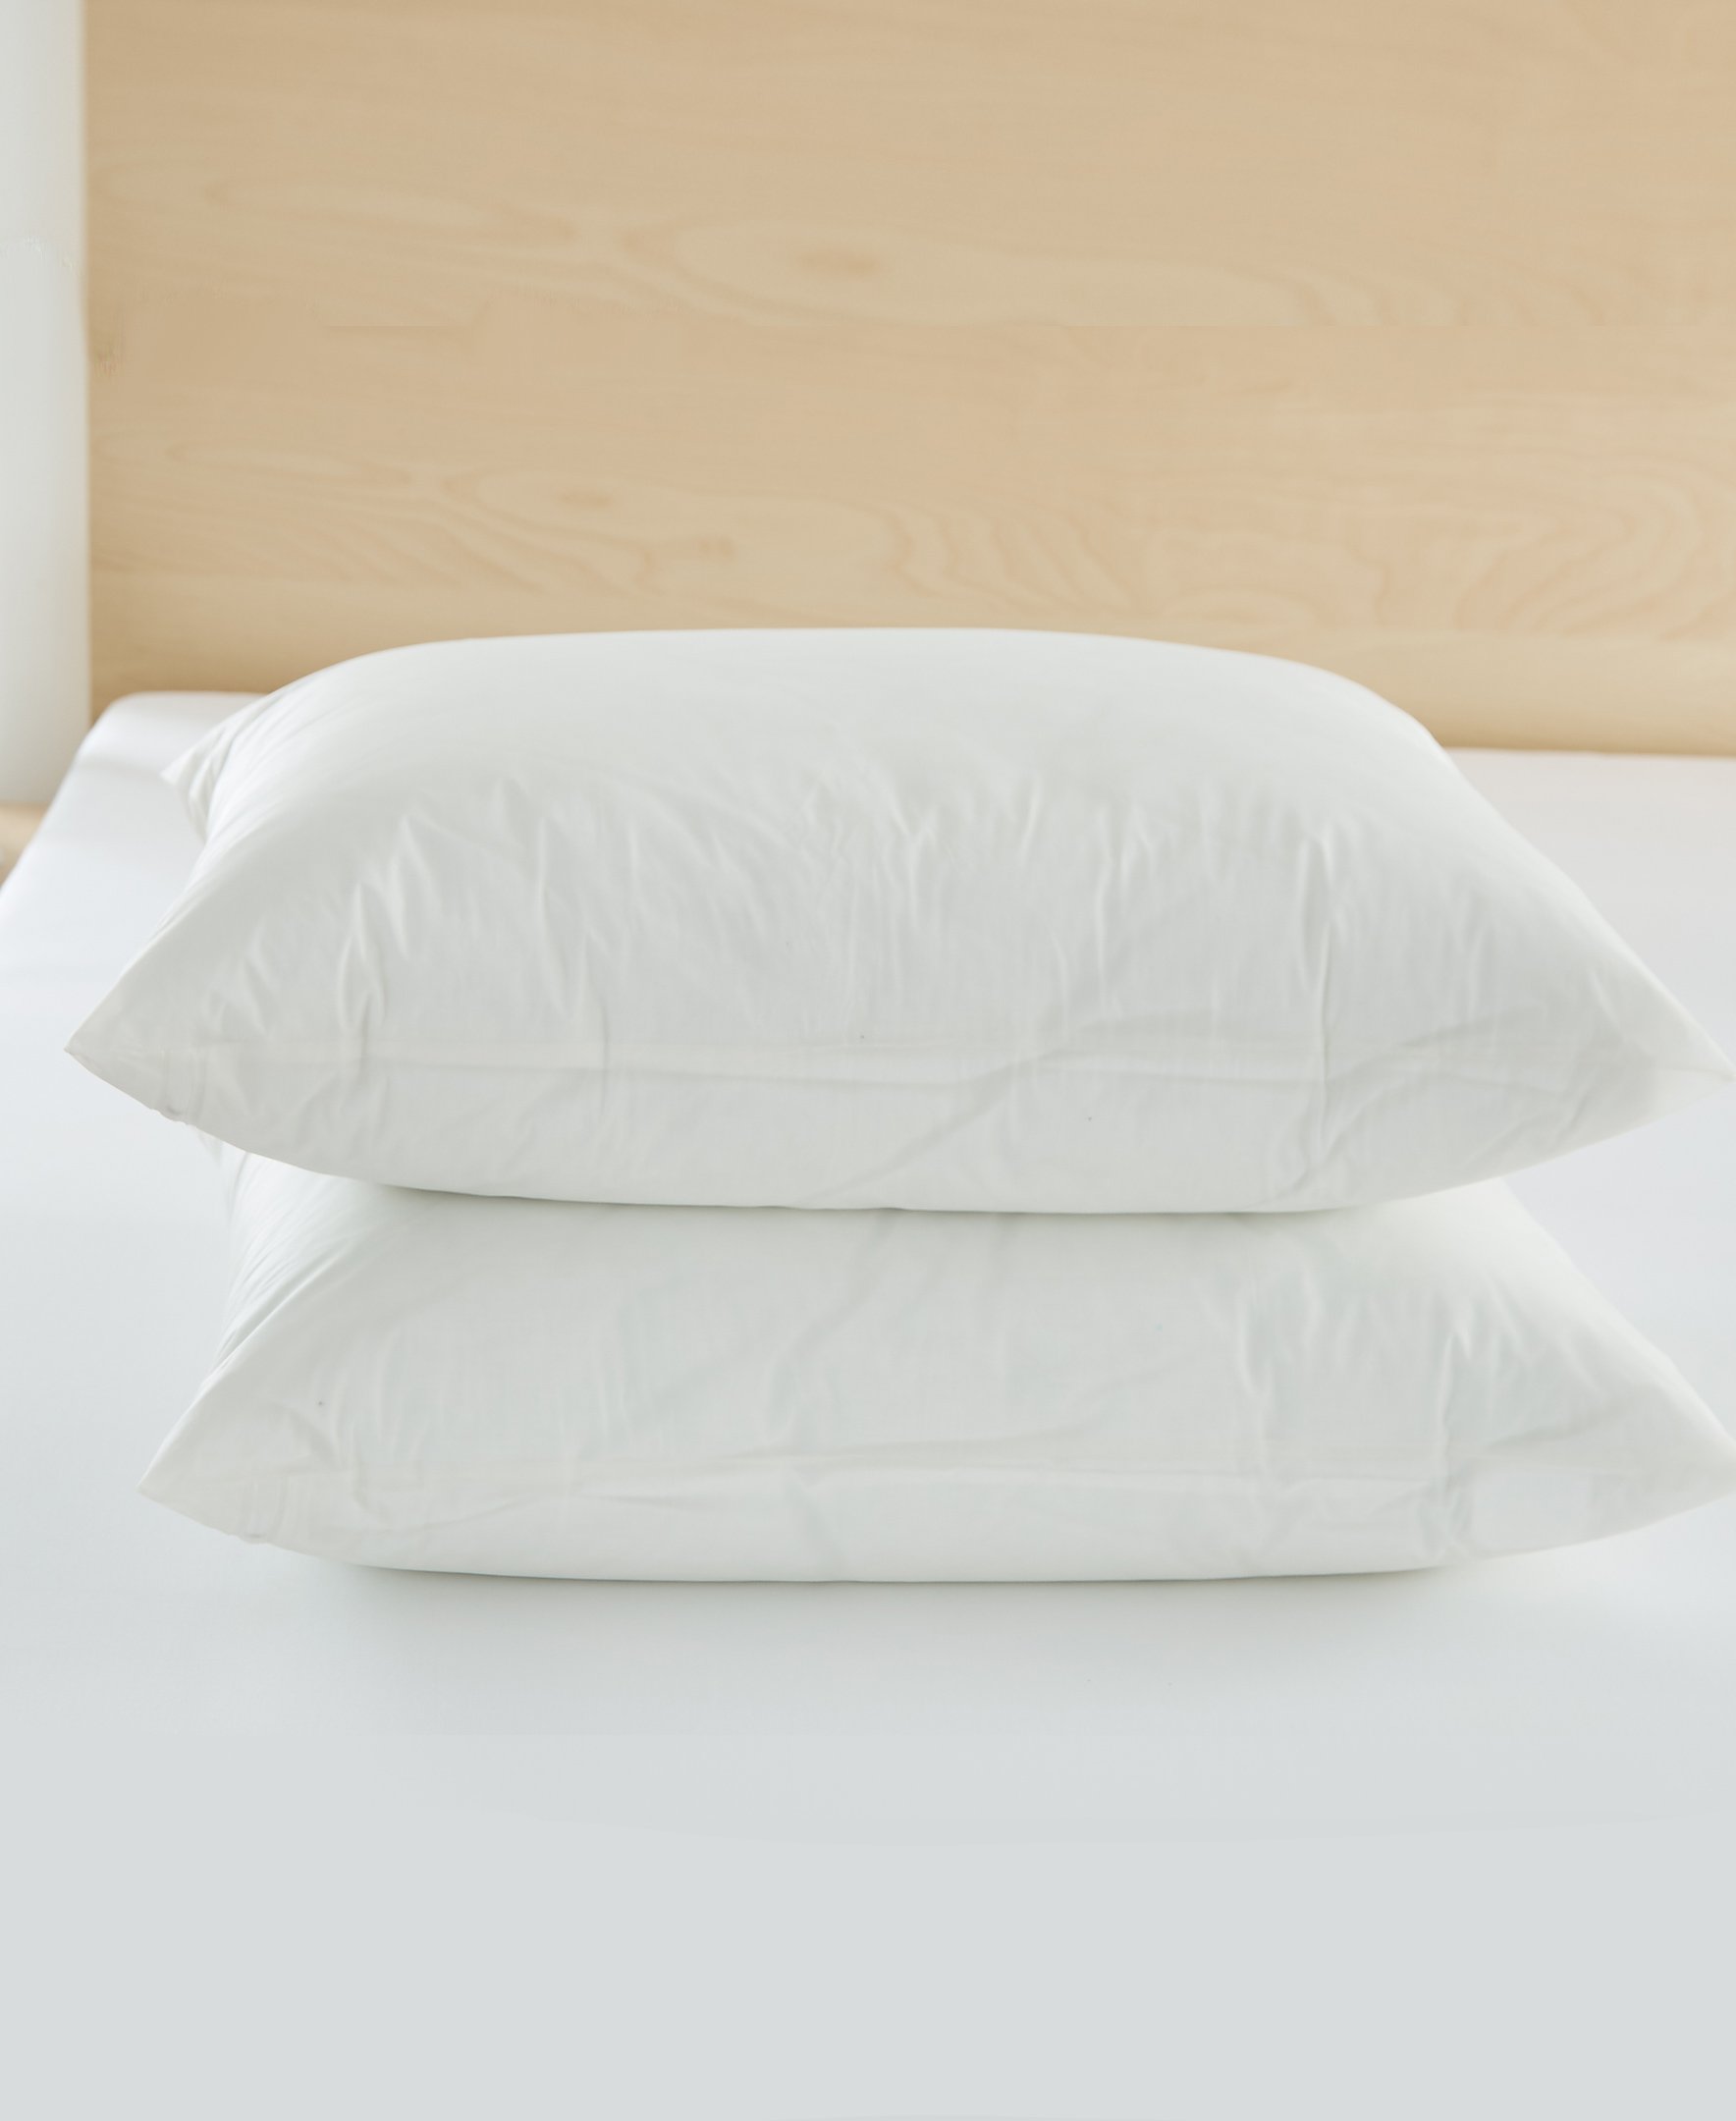 AllergyCare 100% Cotton Mattress Encasings and Covers